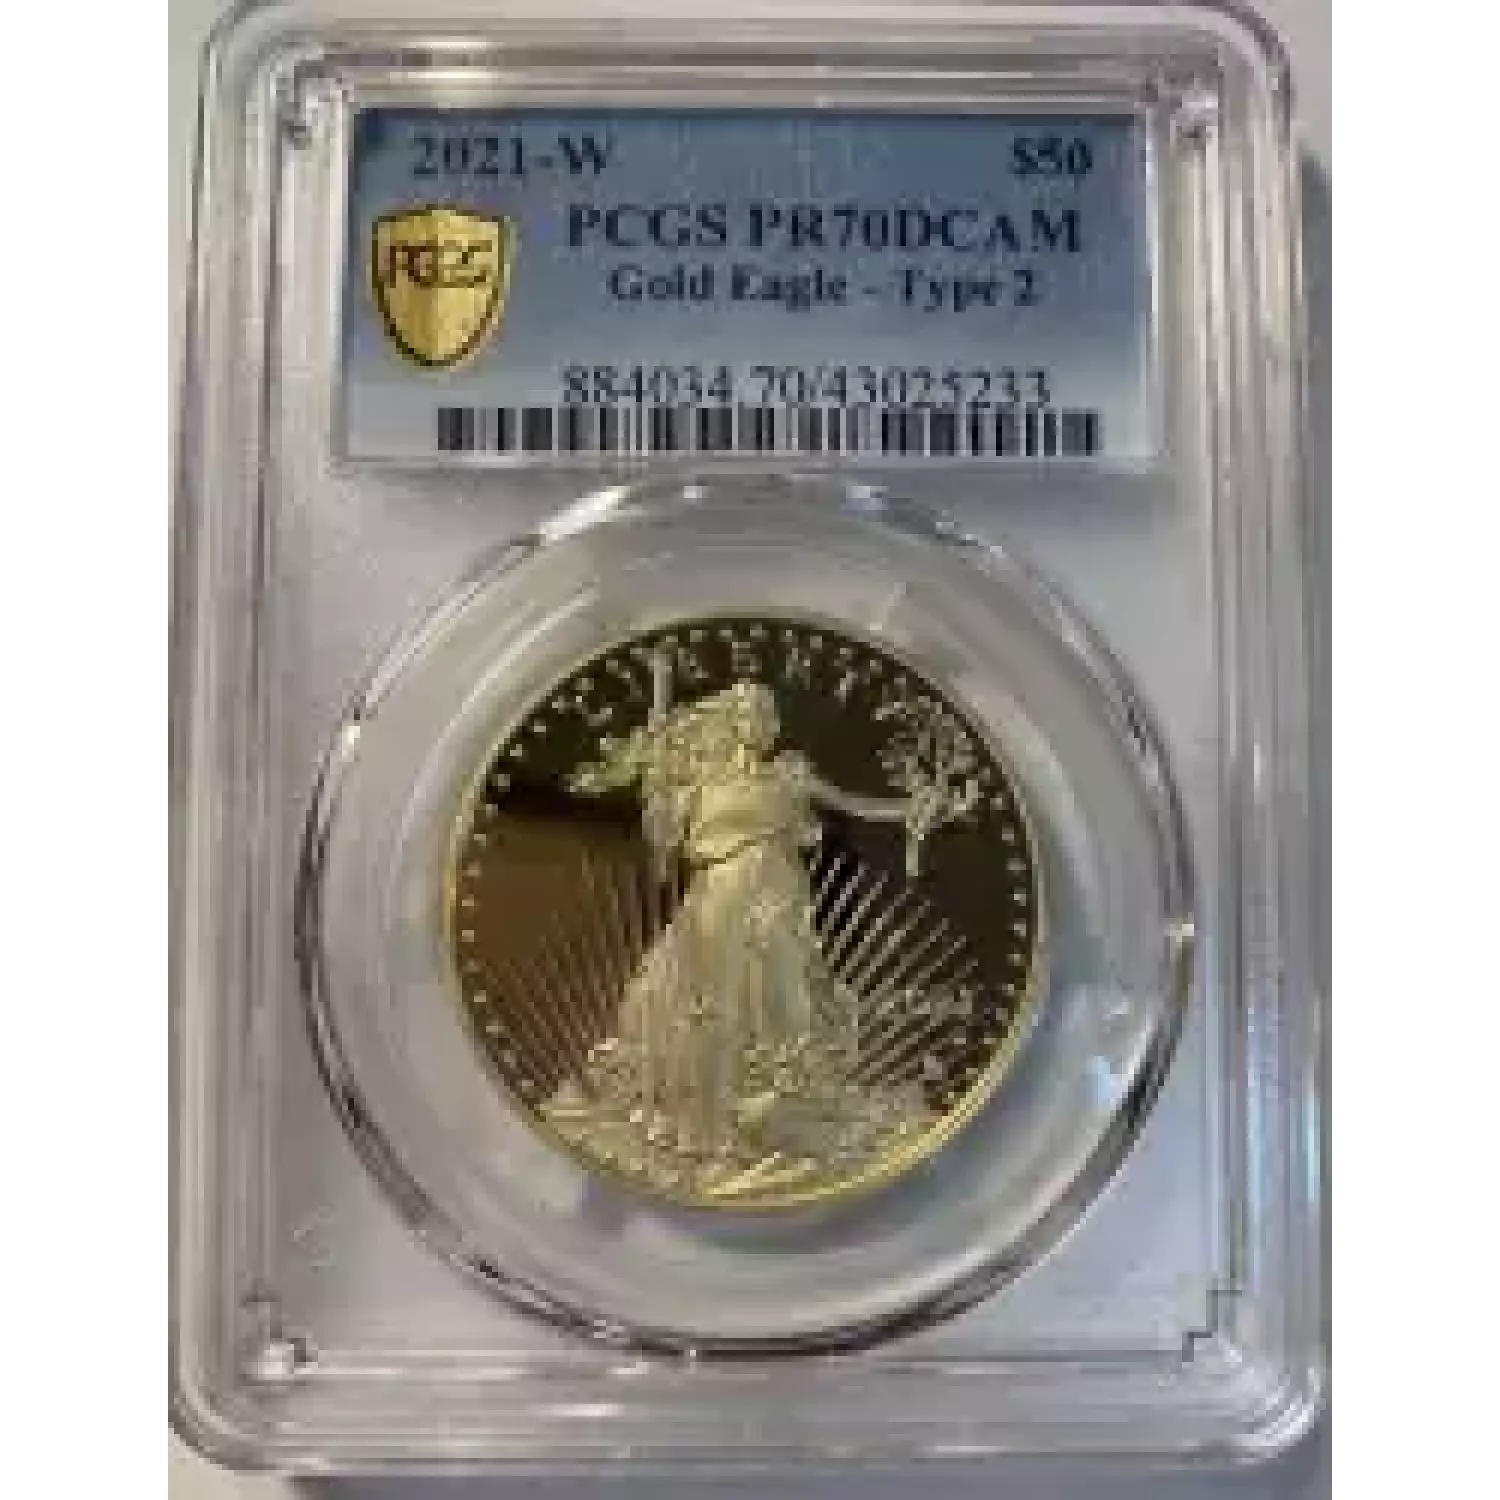 2021-W $50 Gold Eagle - Type 2, DCAM